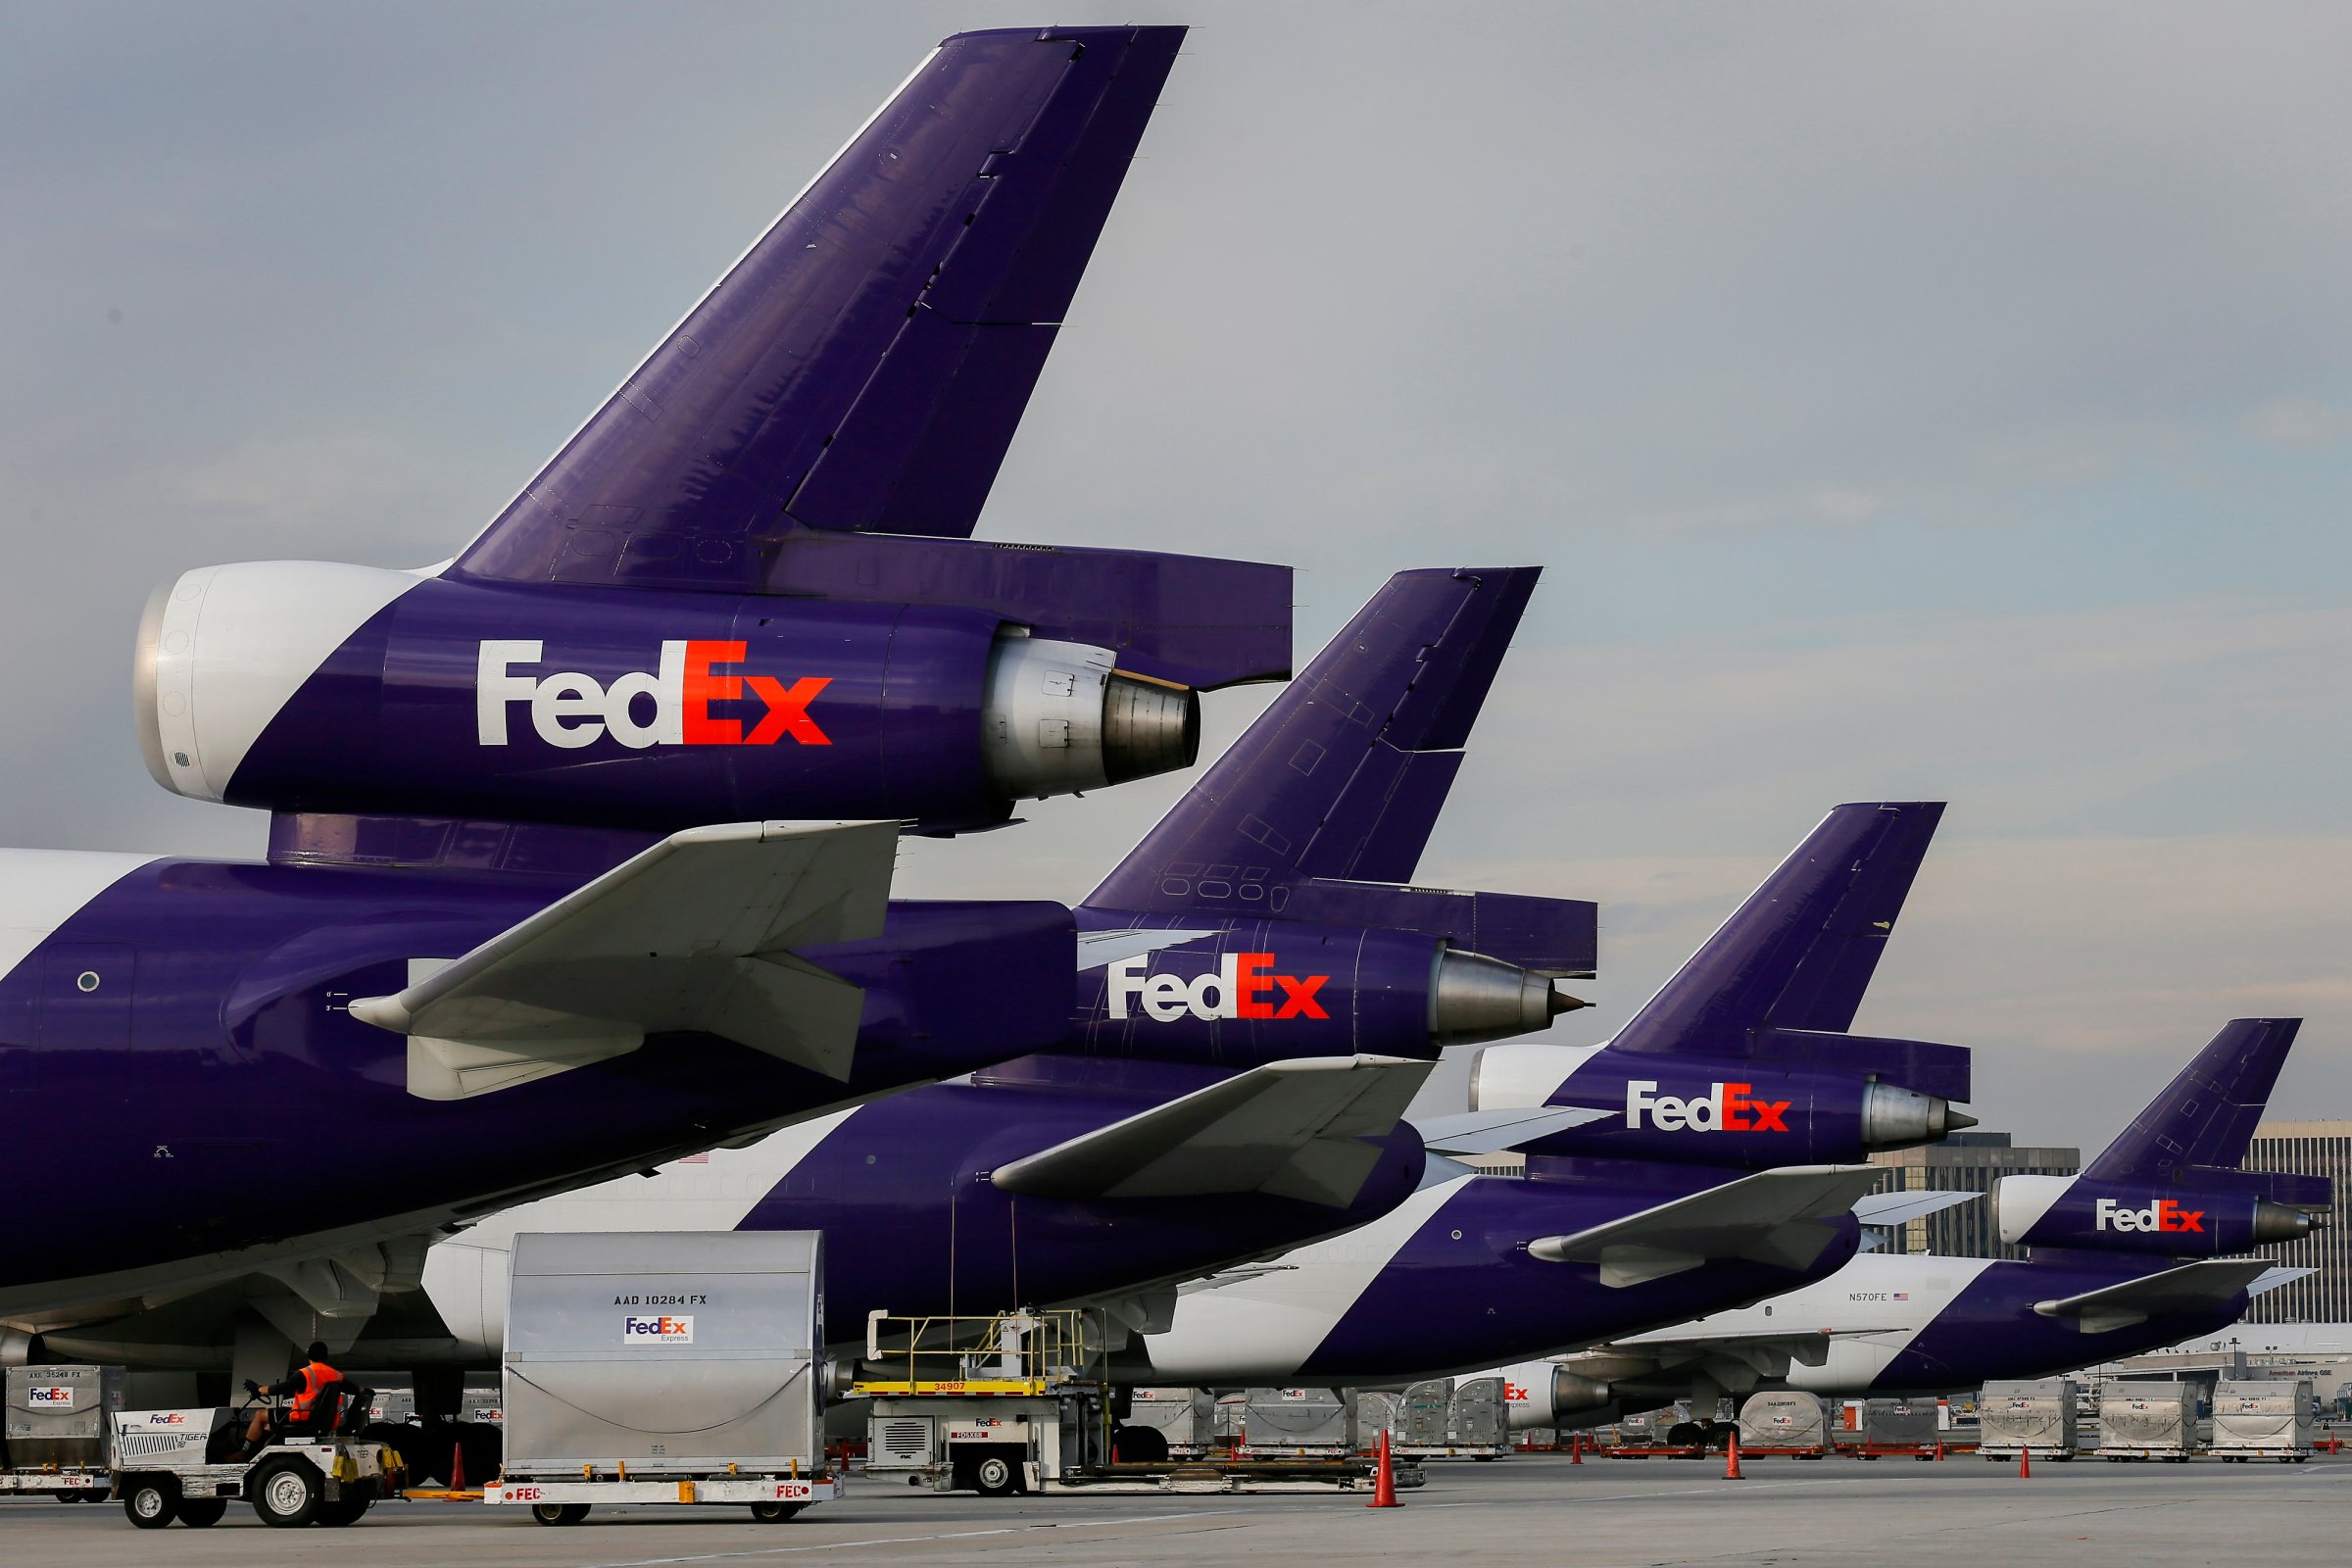 FedEx Corp. aircraft await at Los Angeles International Airport in Los Angeles on Dec. 15, 2014.